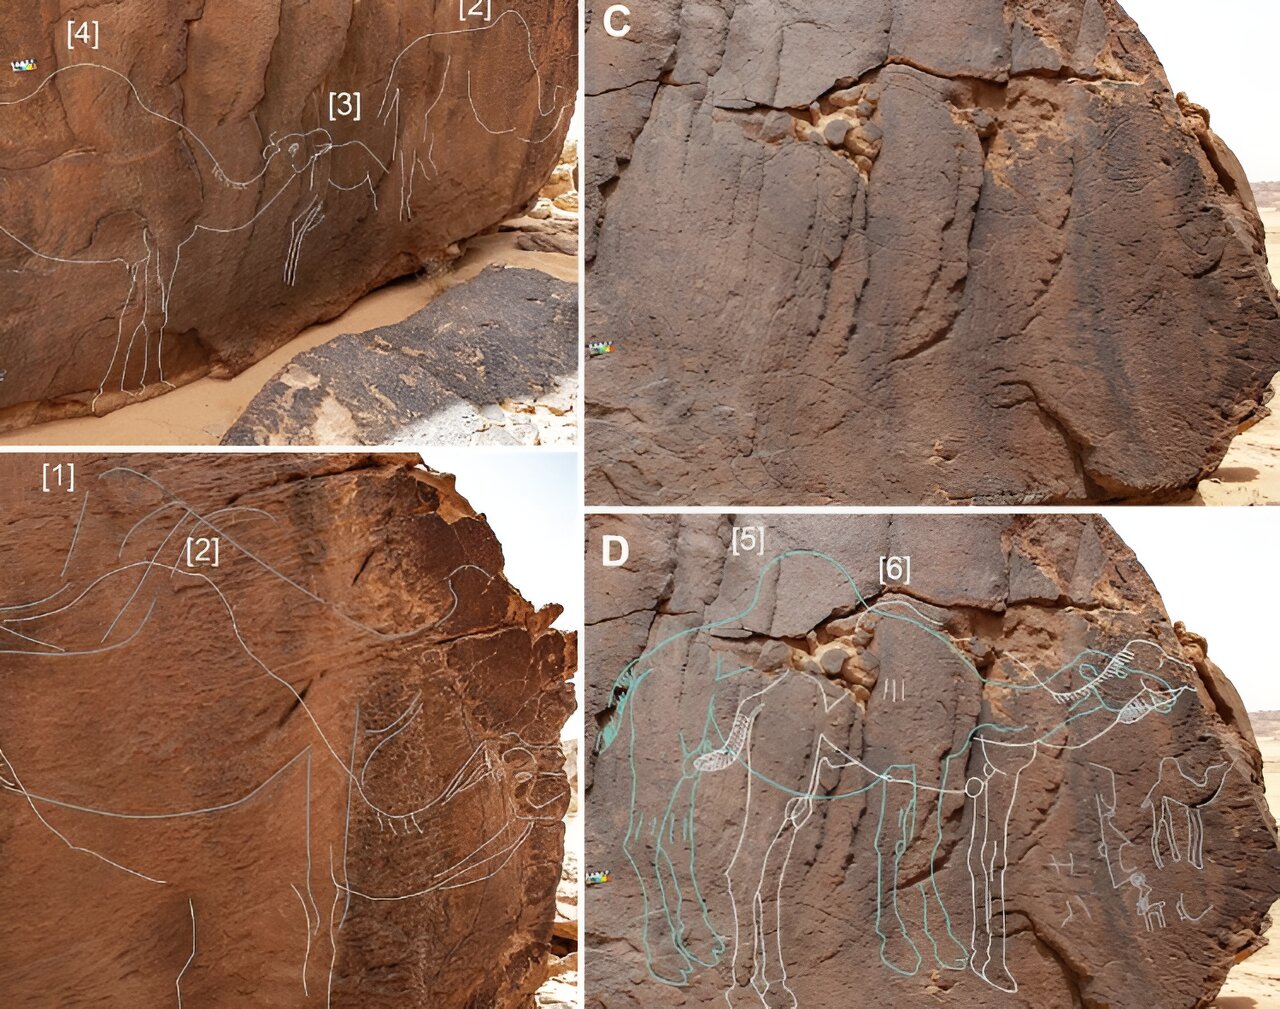 Ancient Carvings of Extinct Camels. Credit: Archaeological Research in Asia (2023). DOI: 10.1016/j.ara.2023.100483.